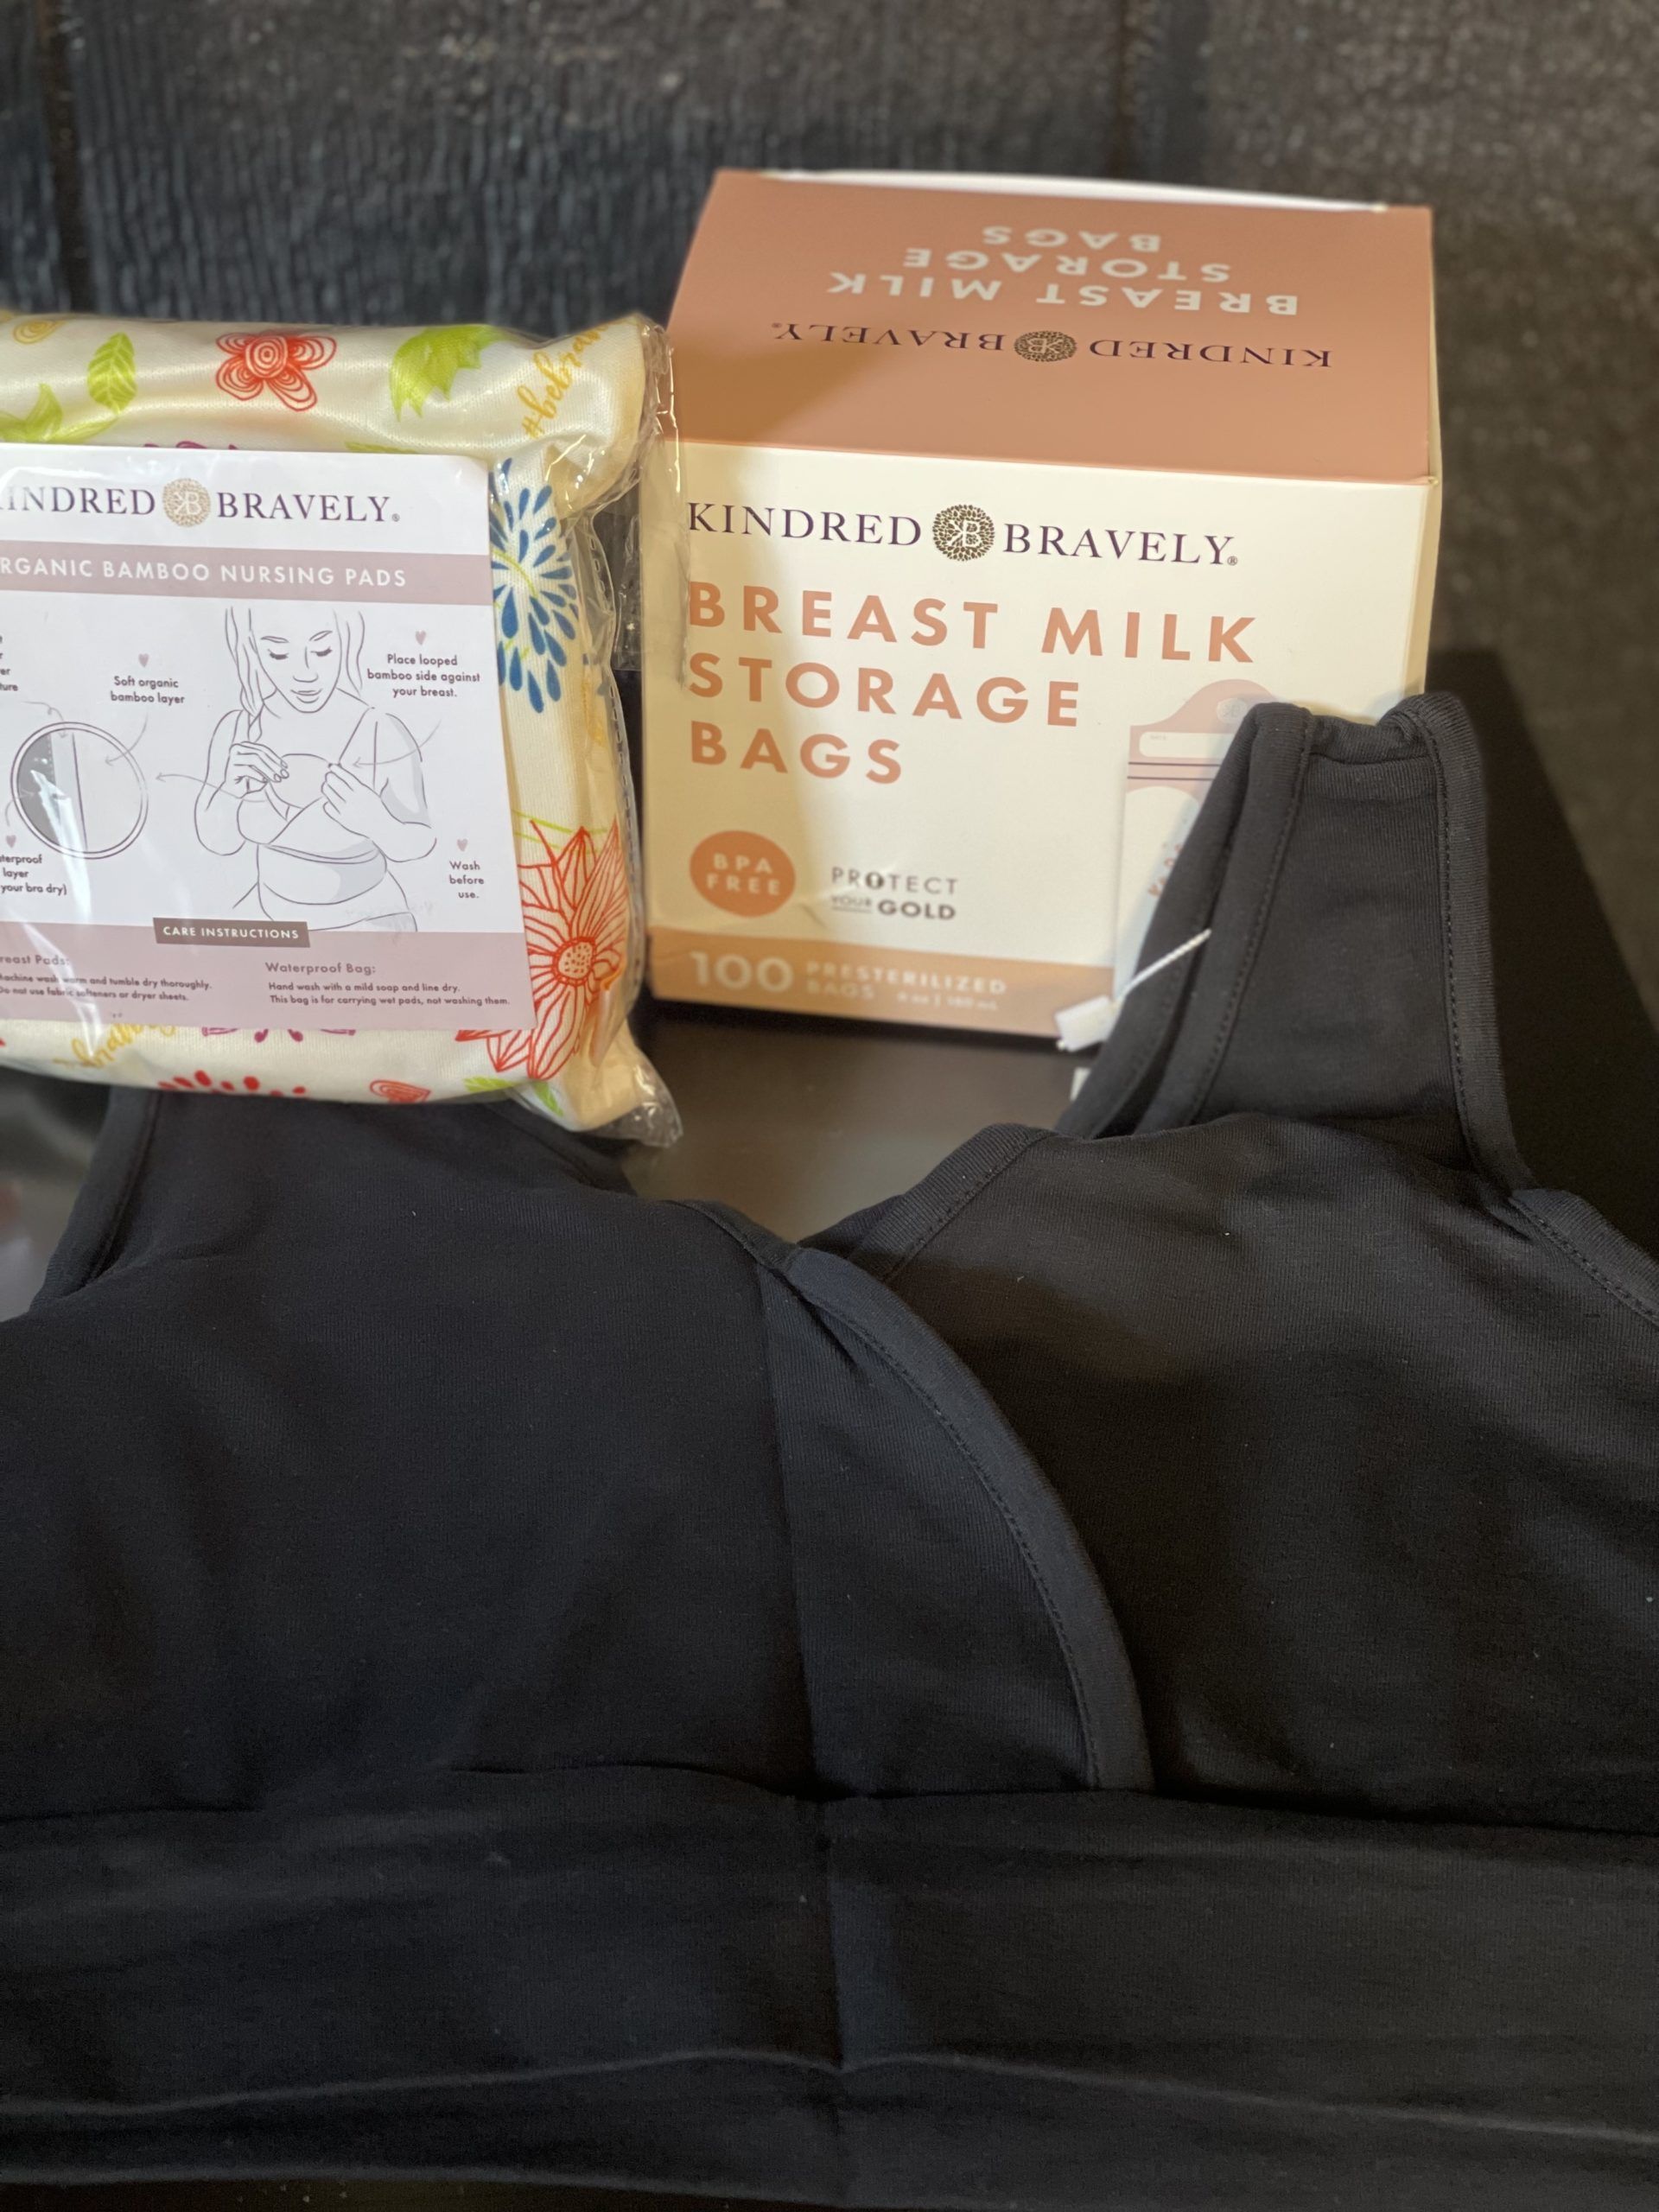 Kindred Bravely bra, breast pads, and milk storage bags